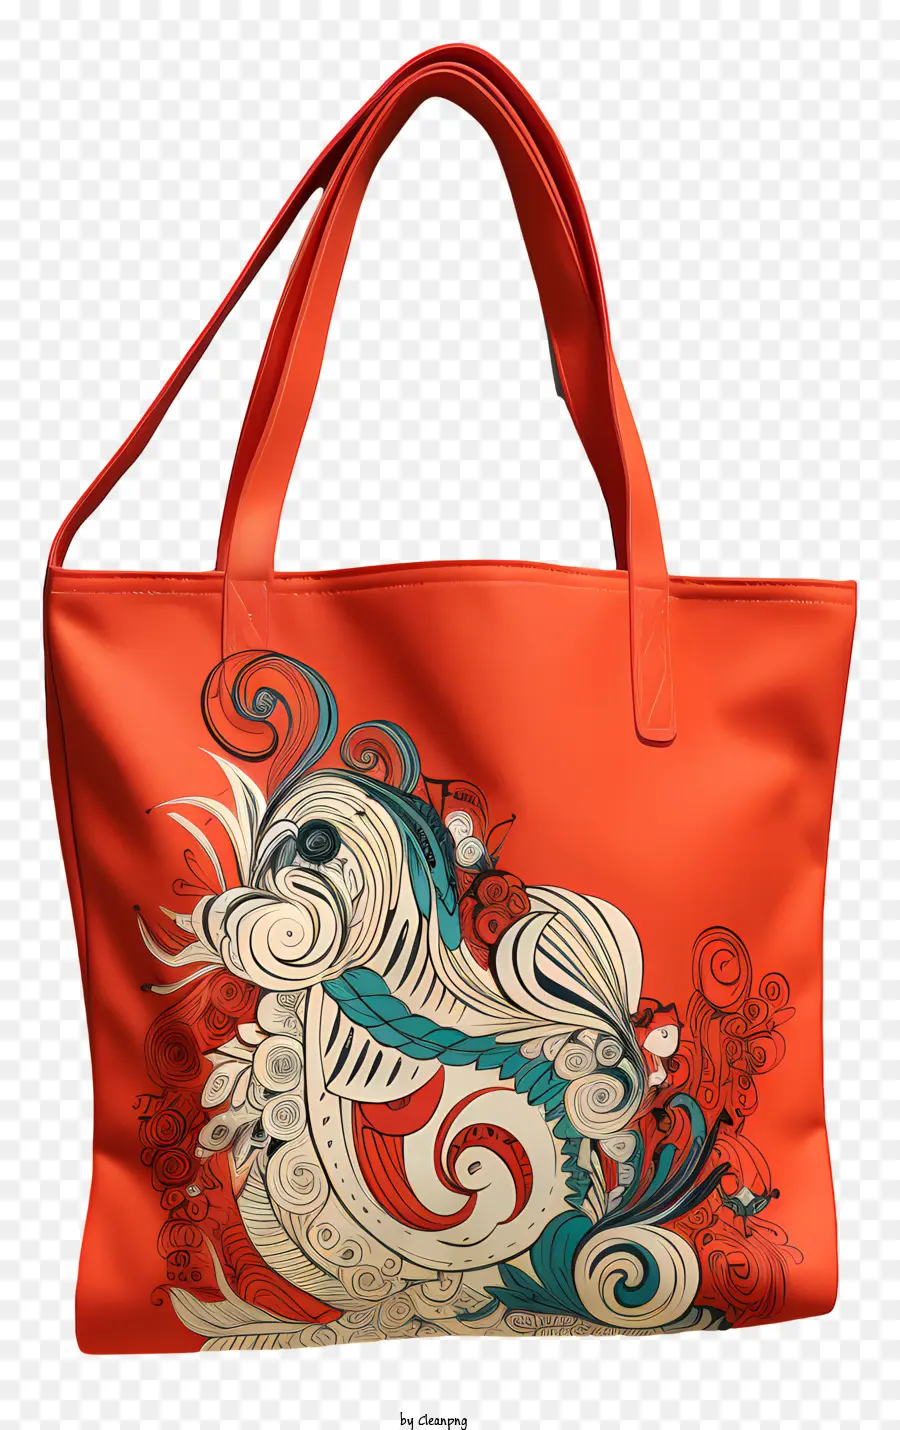 eco tote bag orange leather tote bag swan design blue and red swan pattern flowery design